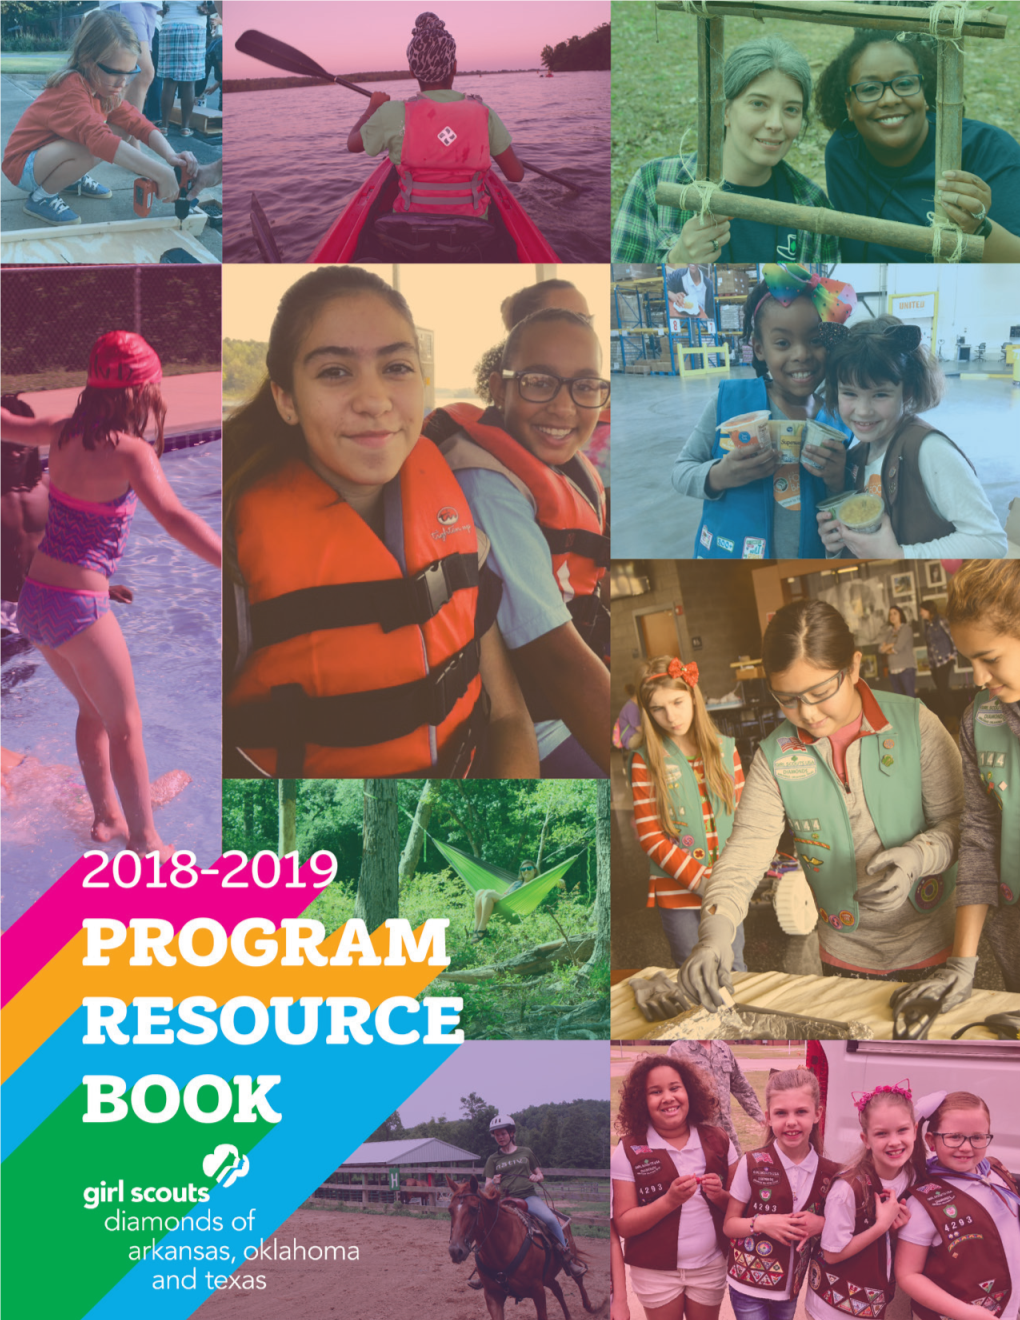 2018-2019 Program Resource Book Table of Contents